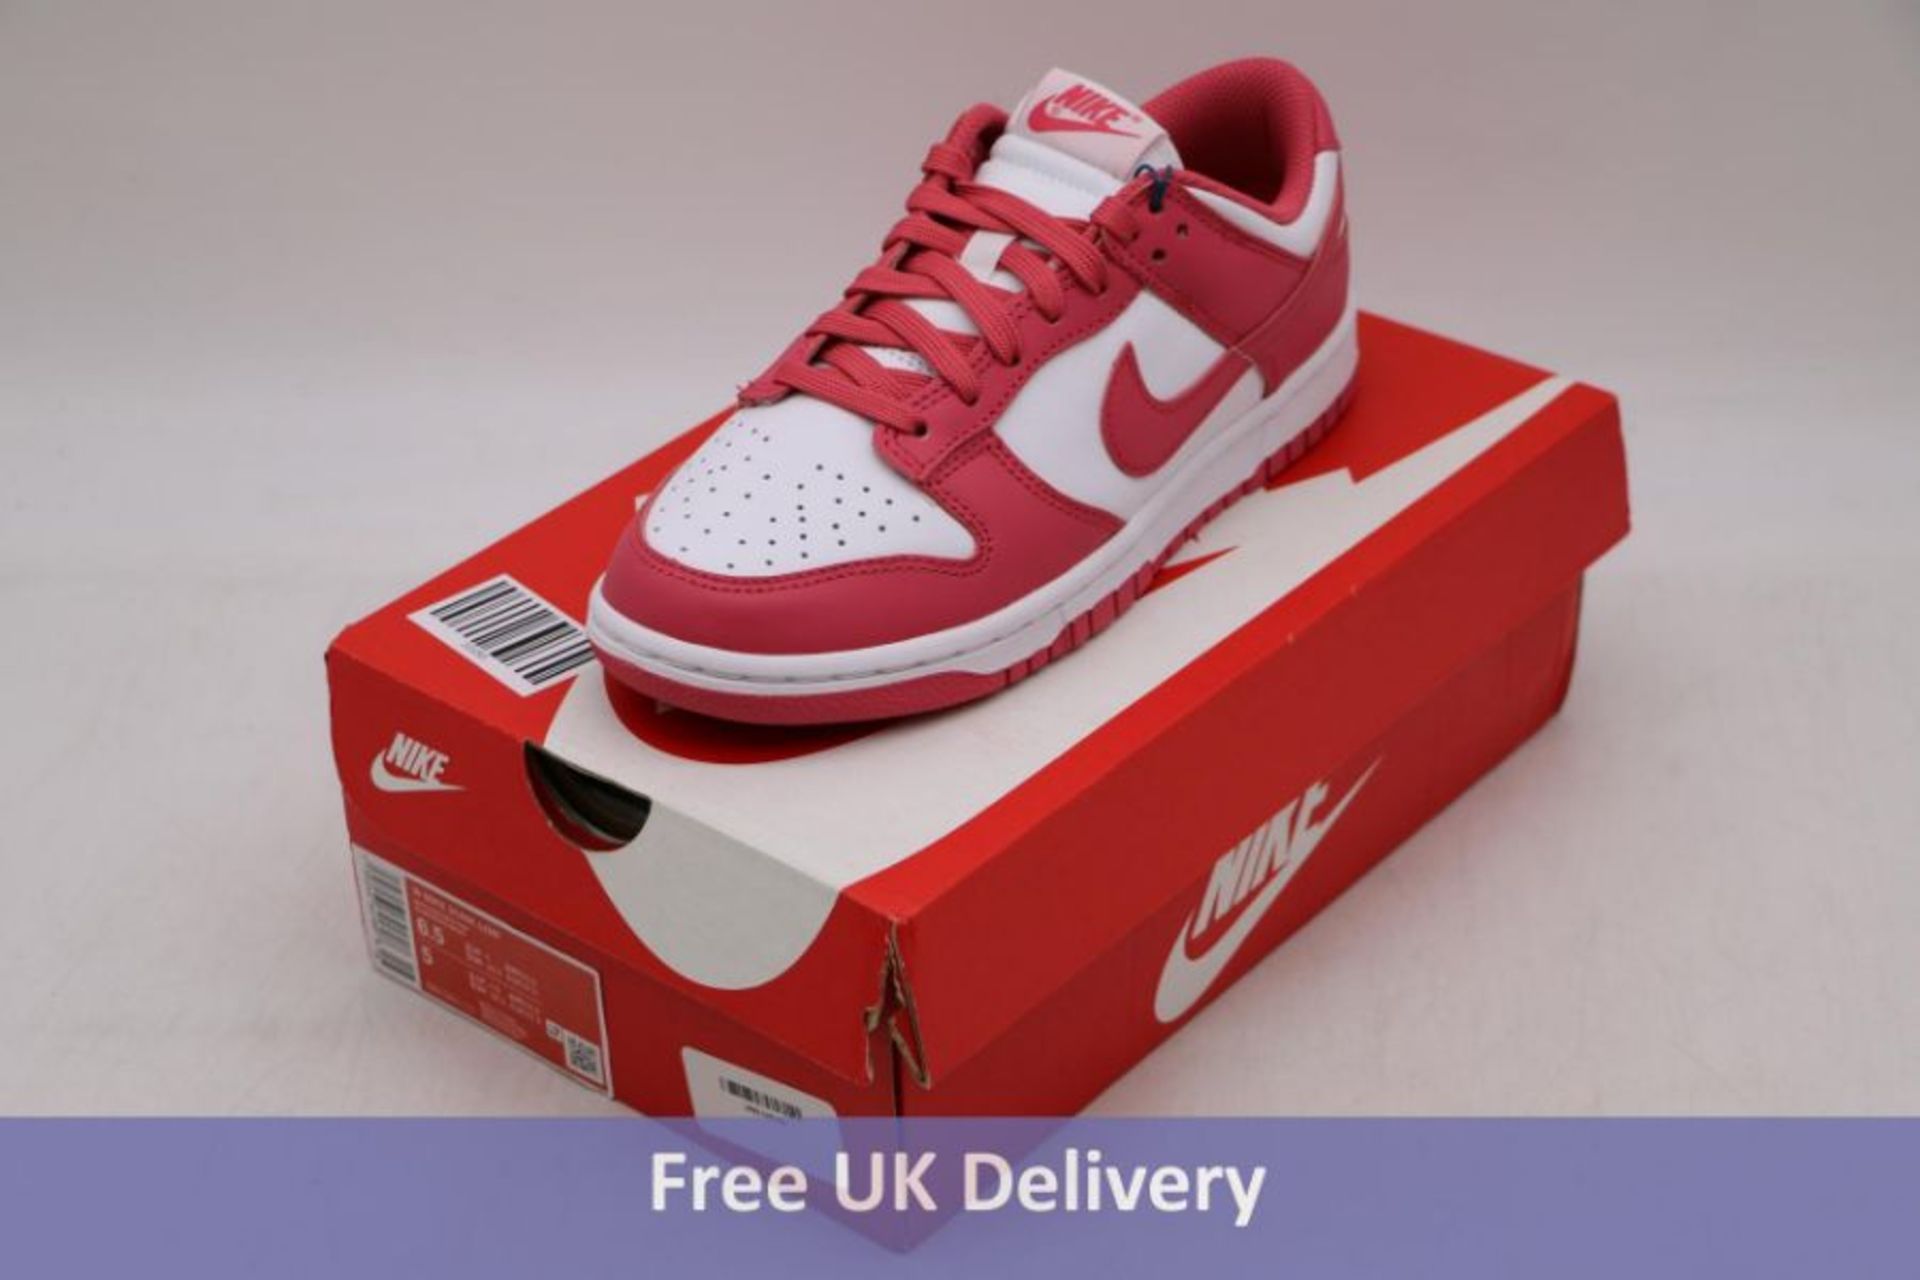 Nike Women's Dunk Low Trainers, White/Archaeo Pink, UK 4